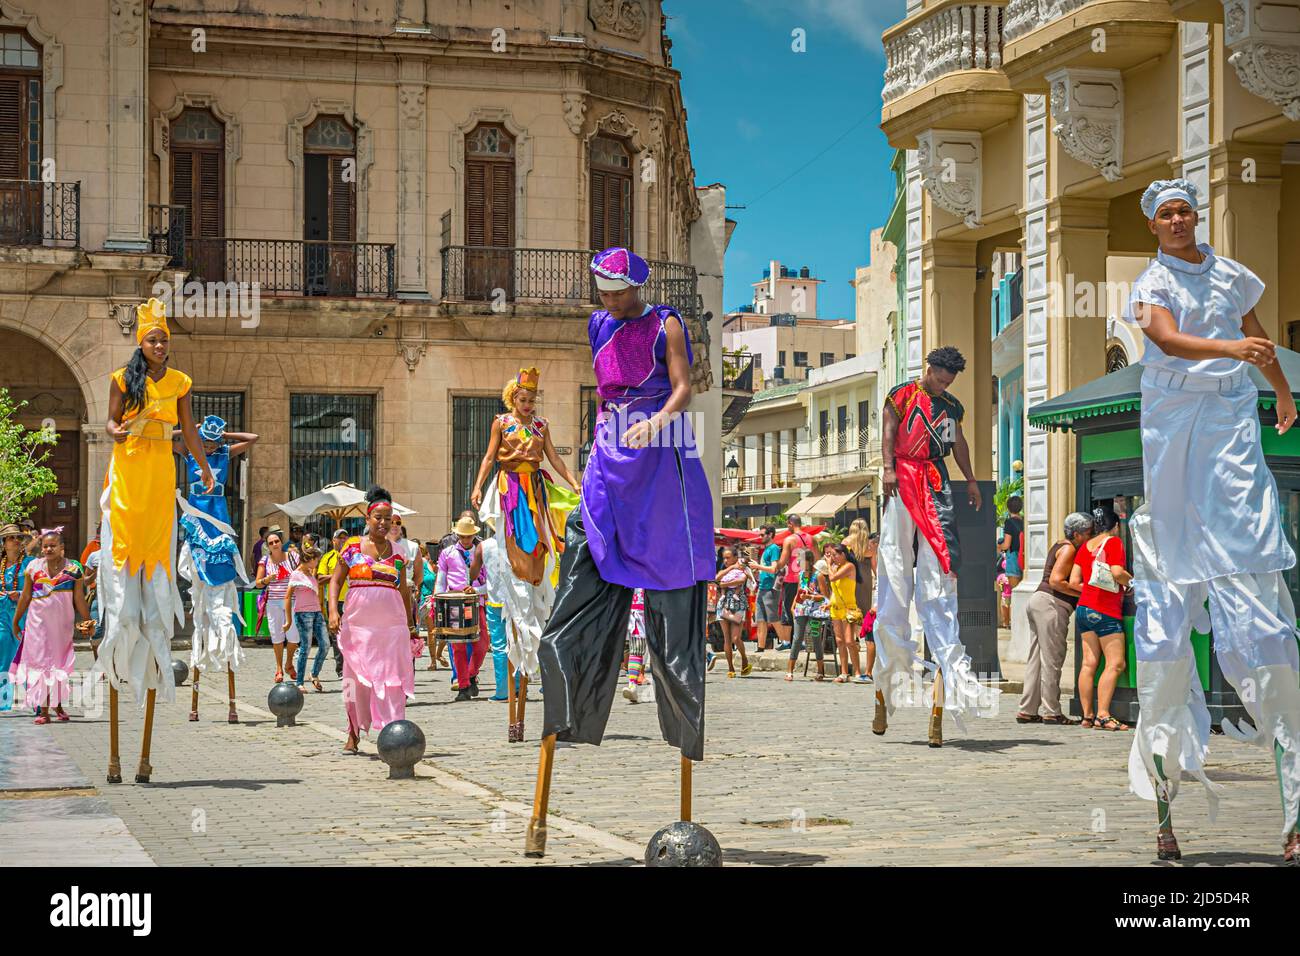 Street artists in their beautiful and colorful costumes at Plaza Vieja, Havana, Cuba Stock Photo